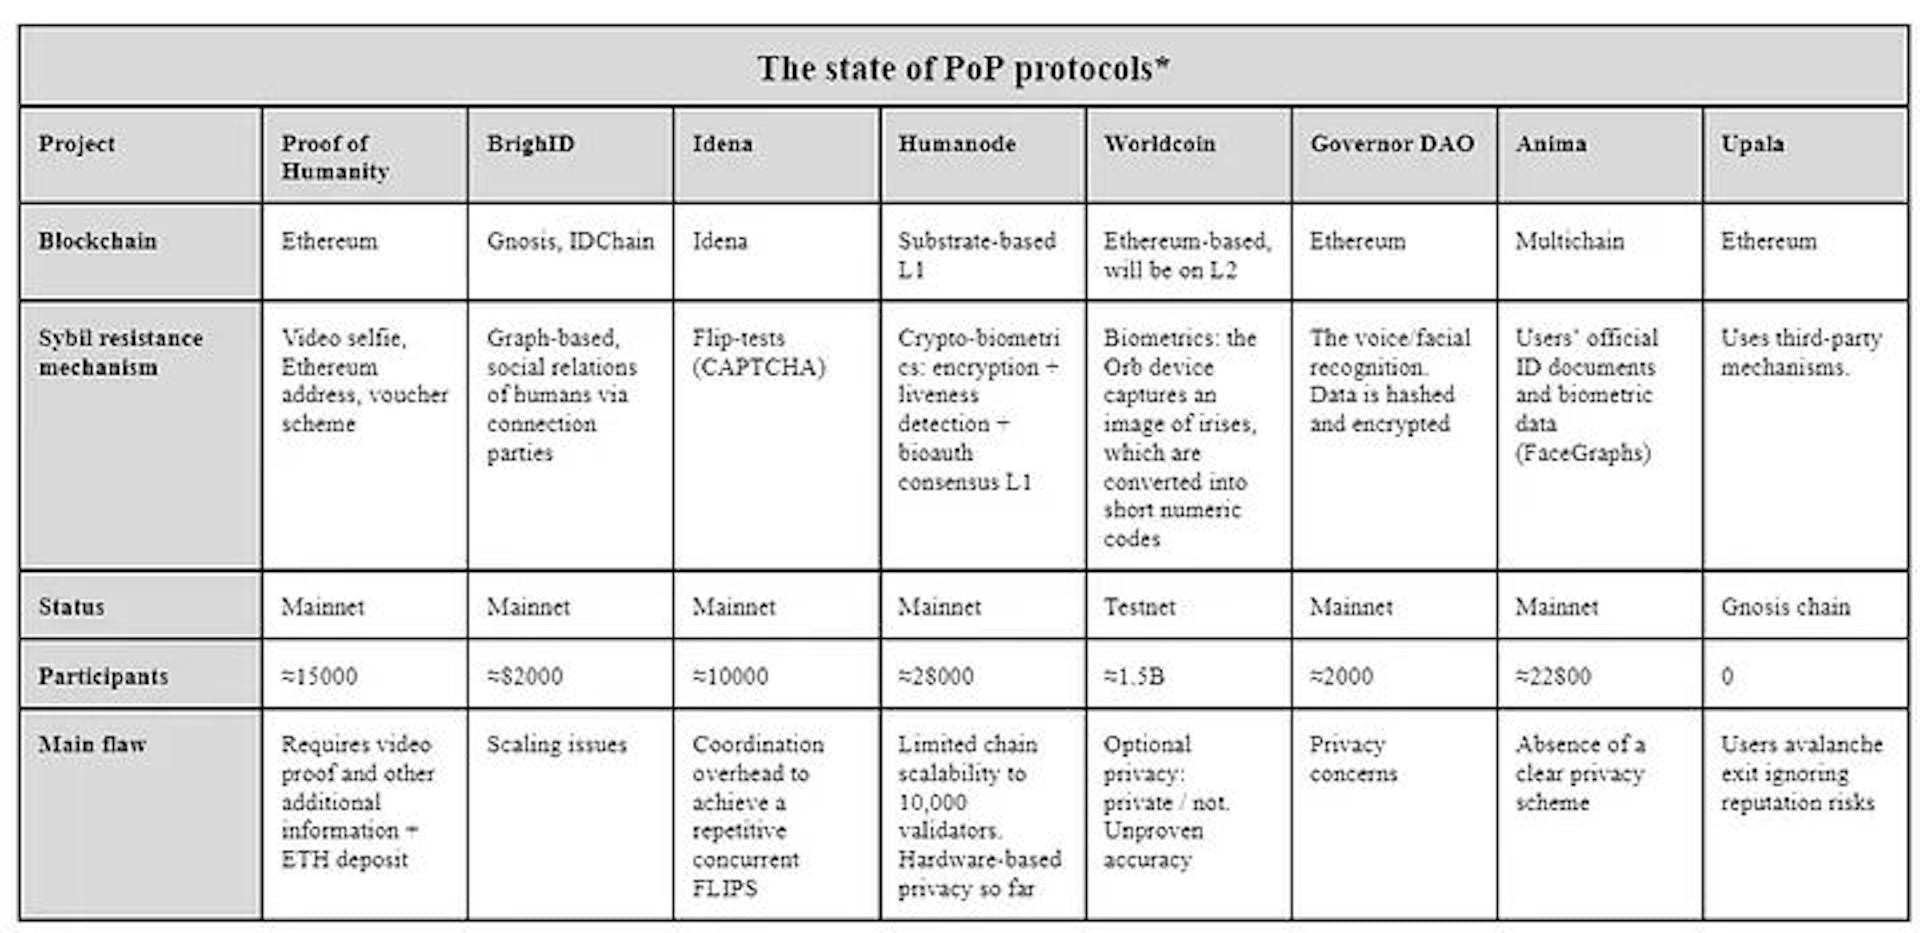 Table 11. The state of PoP protocols.